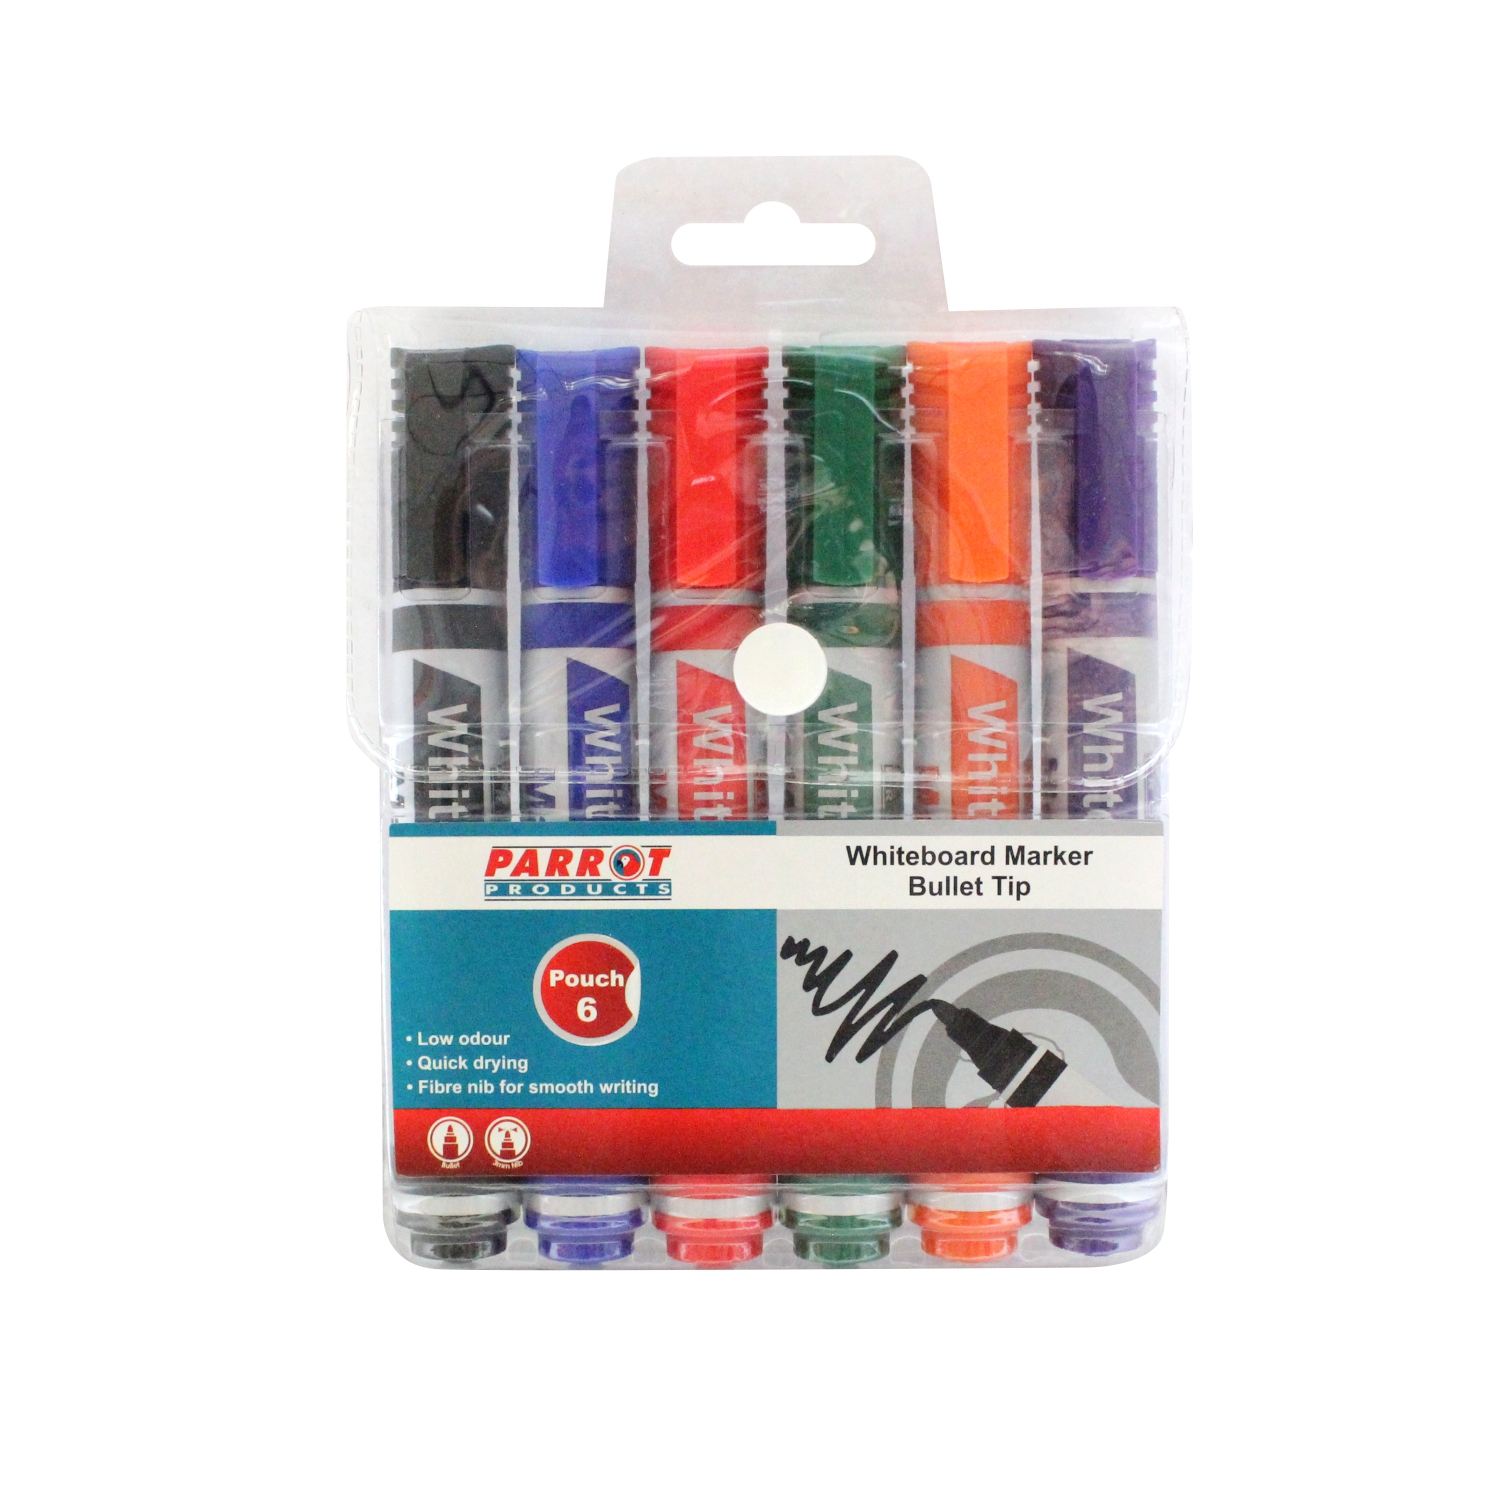 Whiteboard Markers (6 Markers - Bullet Tip - Pouch)